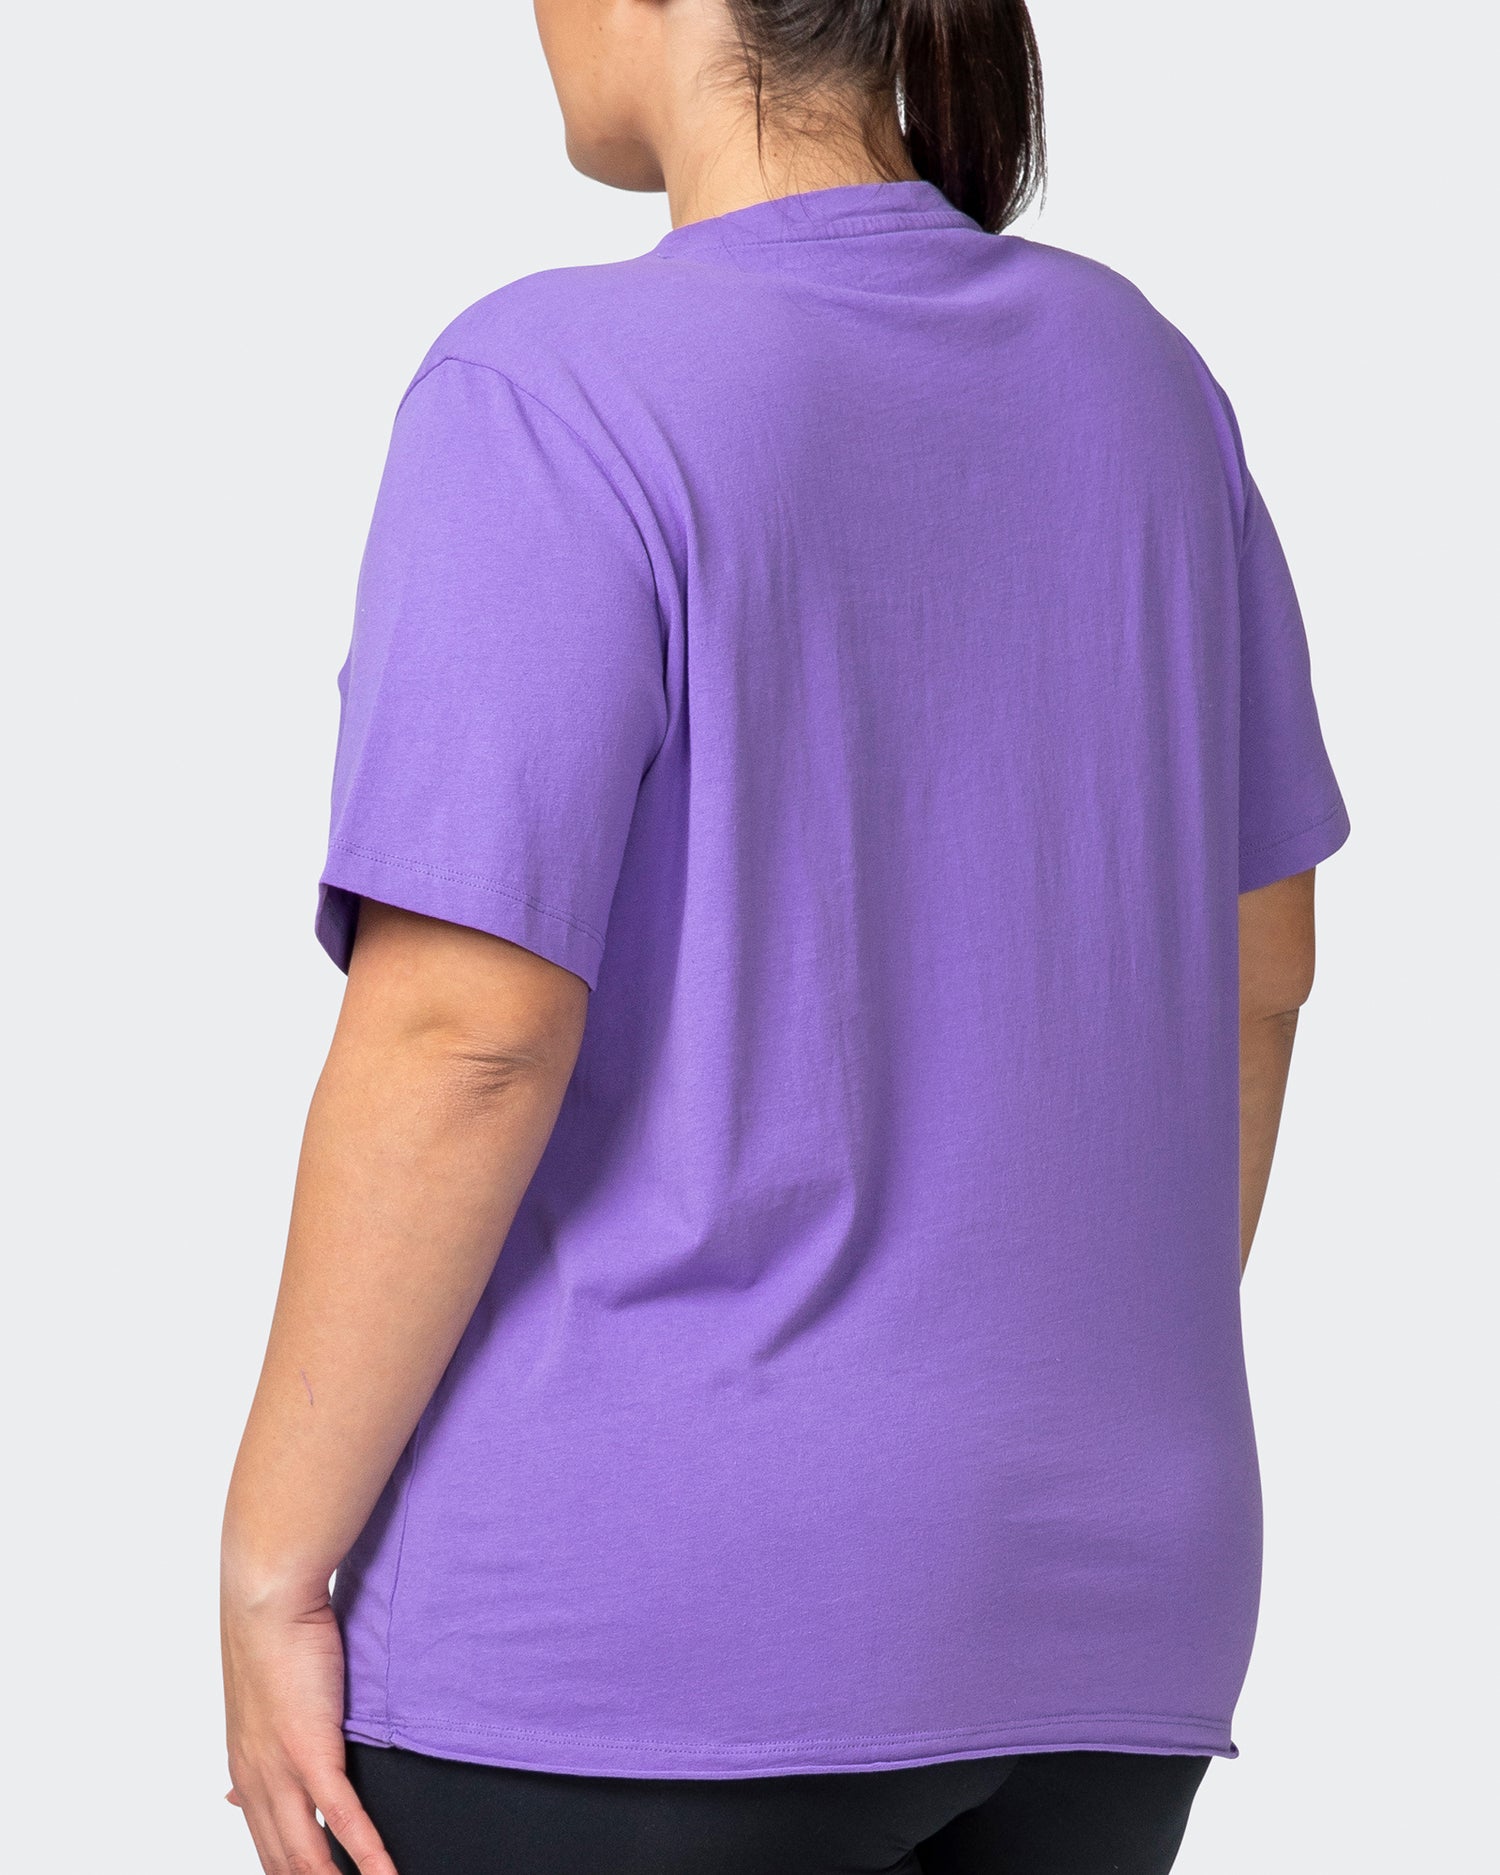 Classic Regular Fit Vintage Tee - Washed Aster Purple